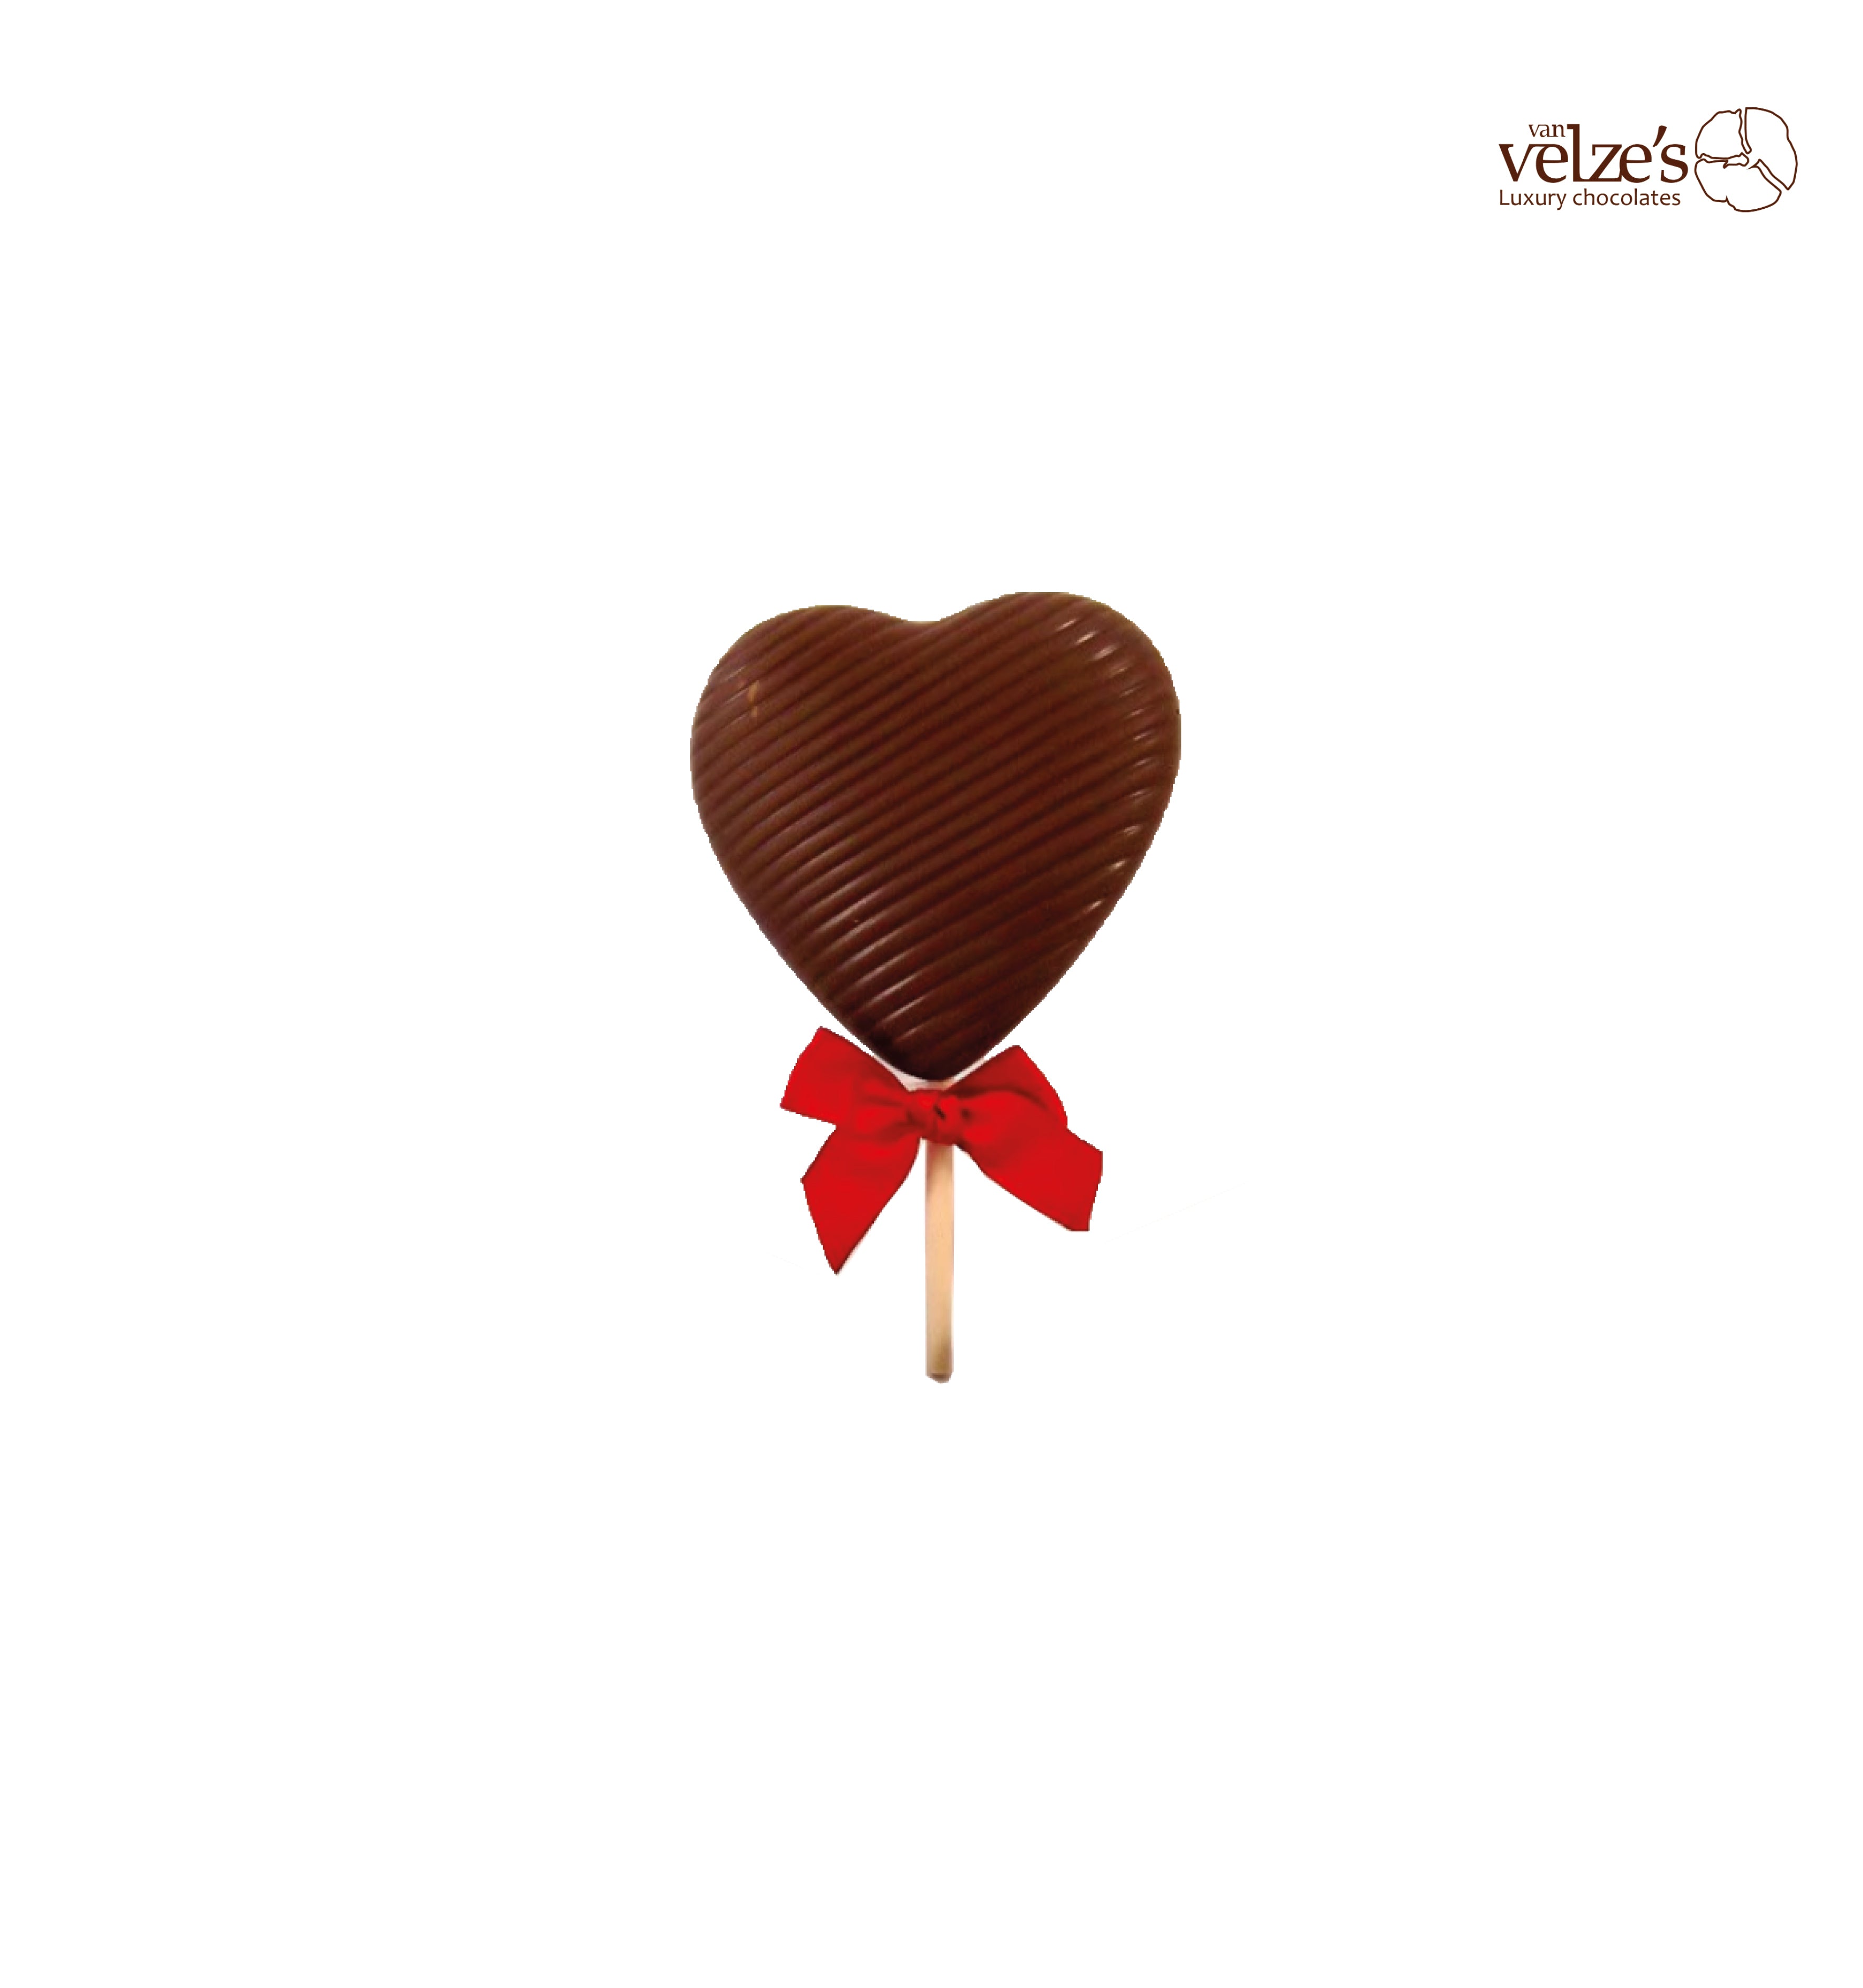 Chocolate Heart lolly